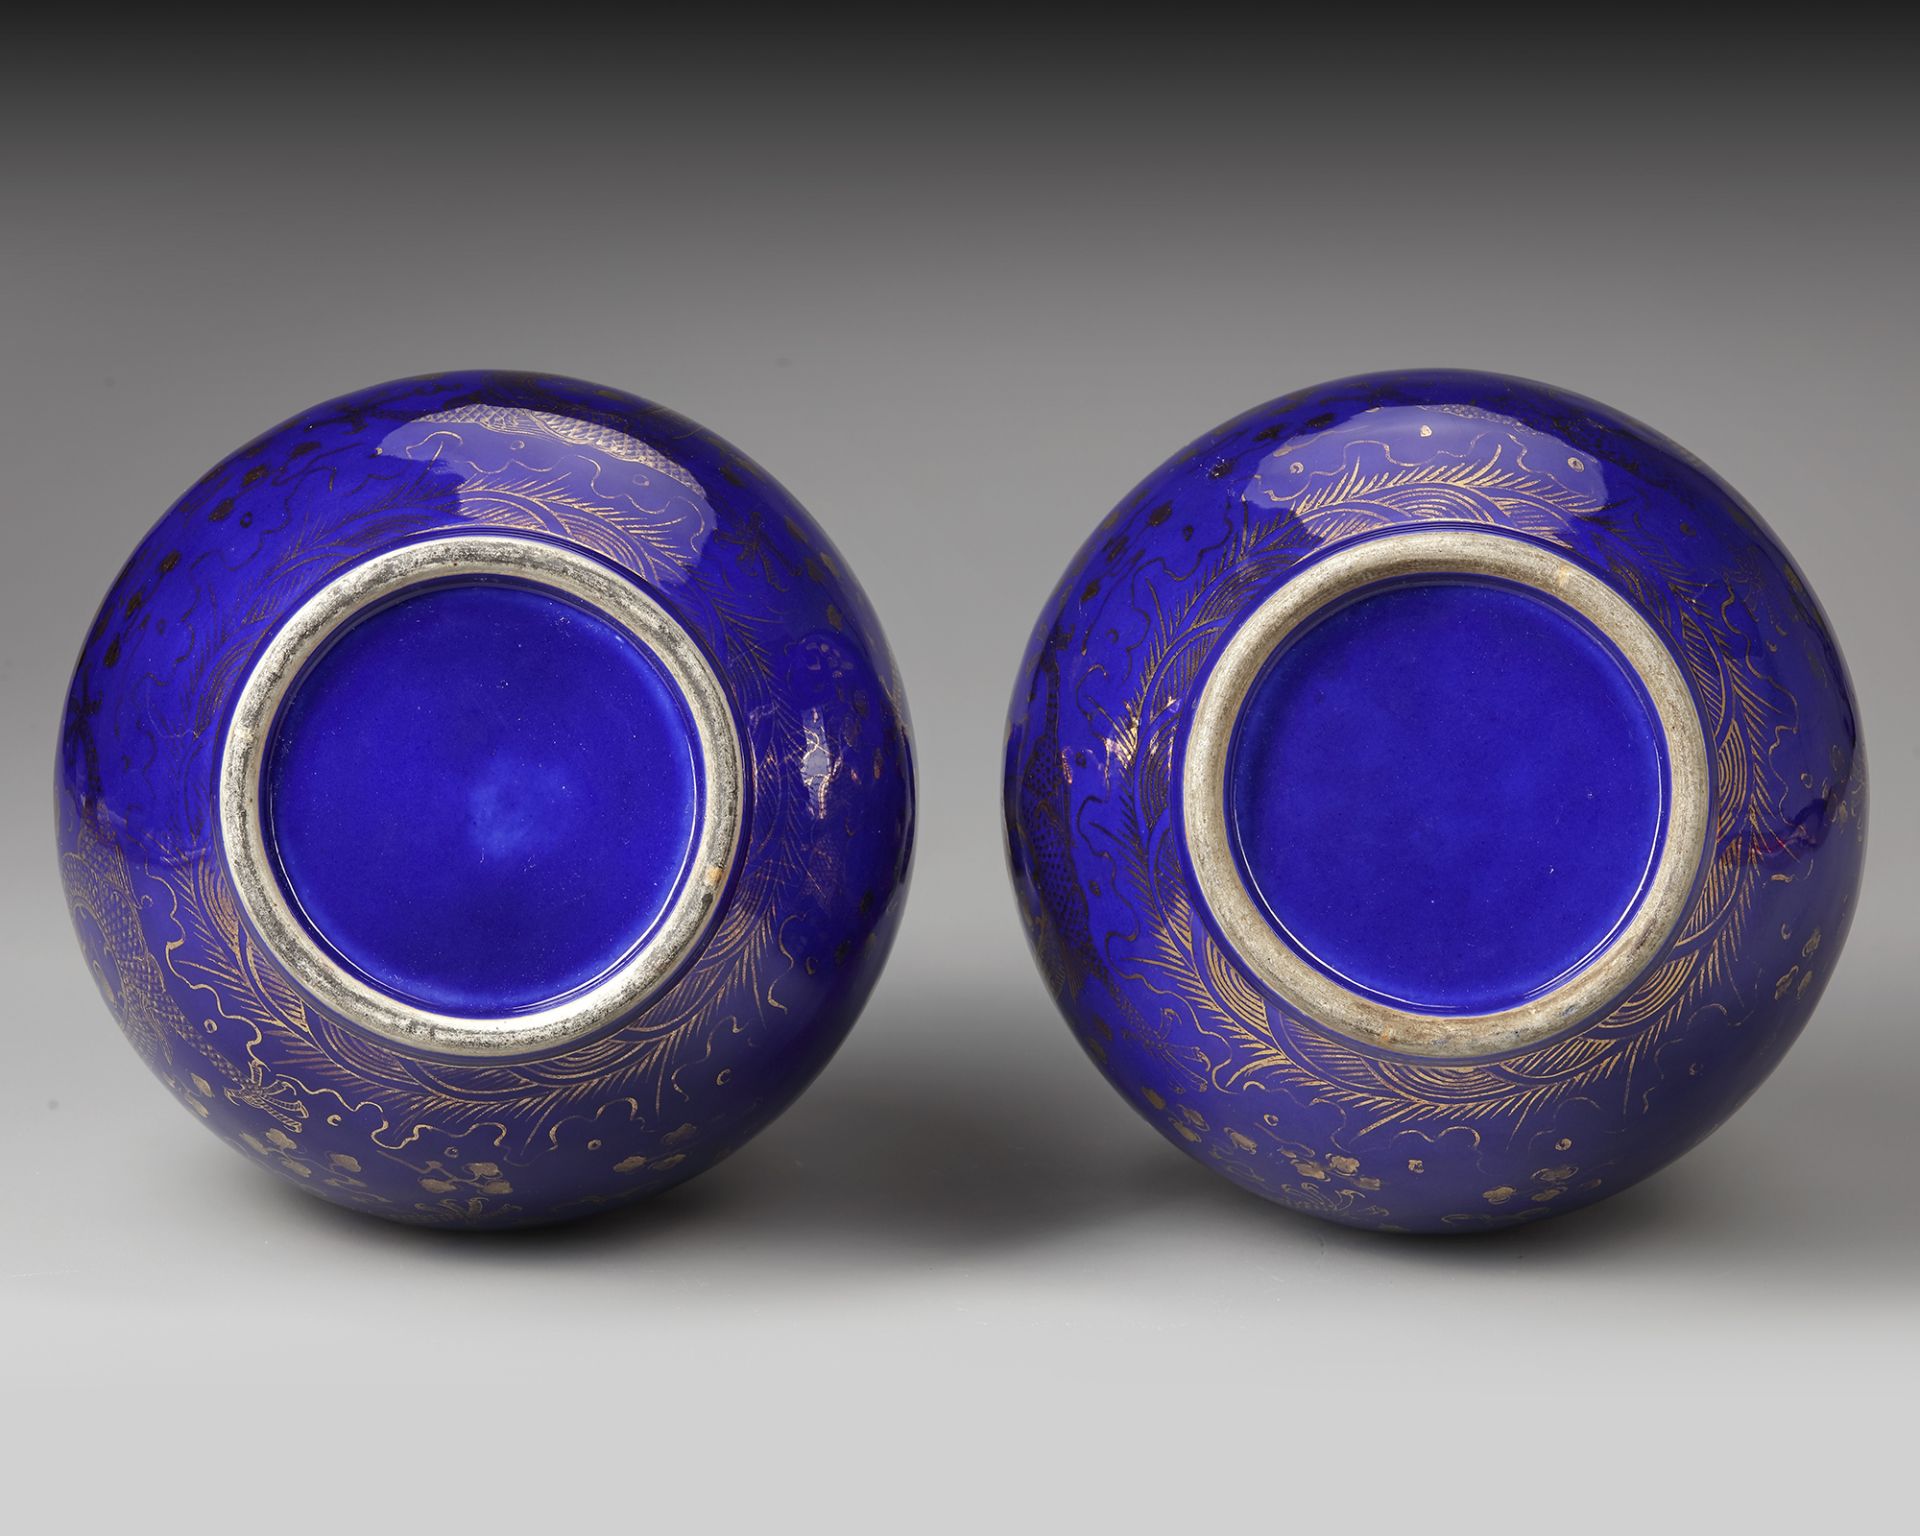 A PAIR OF CHINESE GILT POWDER-BLUE BOTTLE VASES, LATE 19TH-EARLY 20TH CENTURY - Image 4 of 4